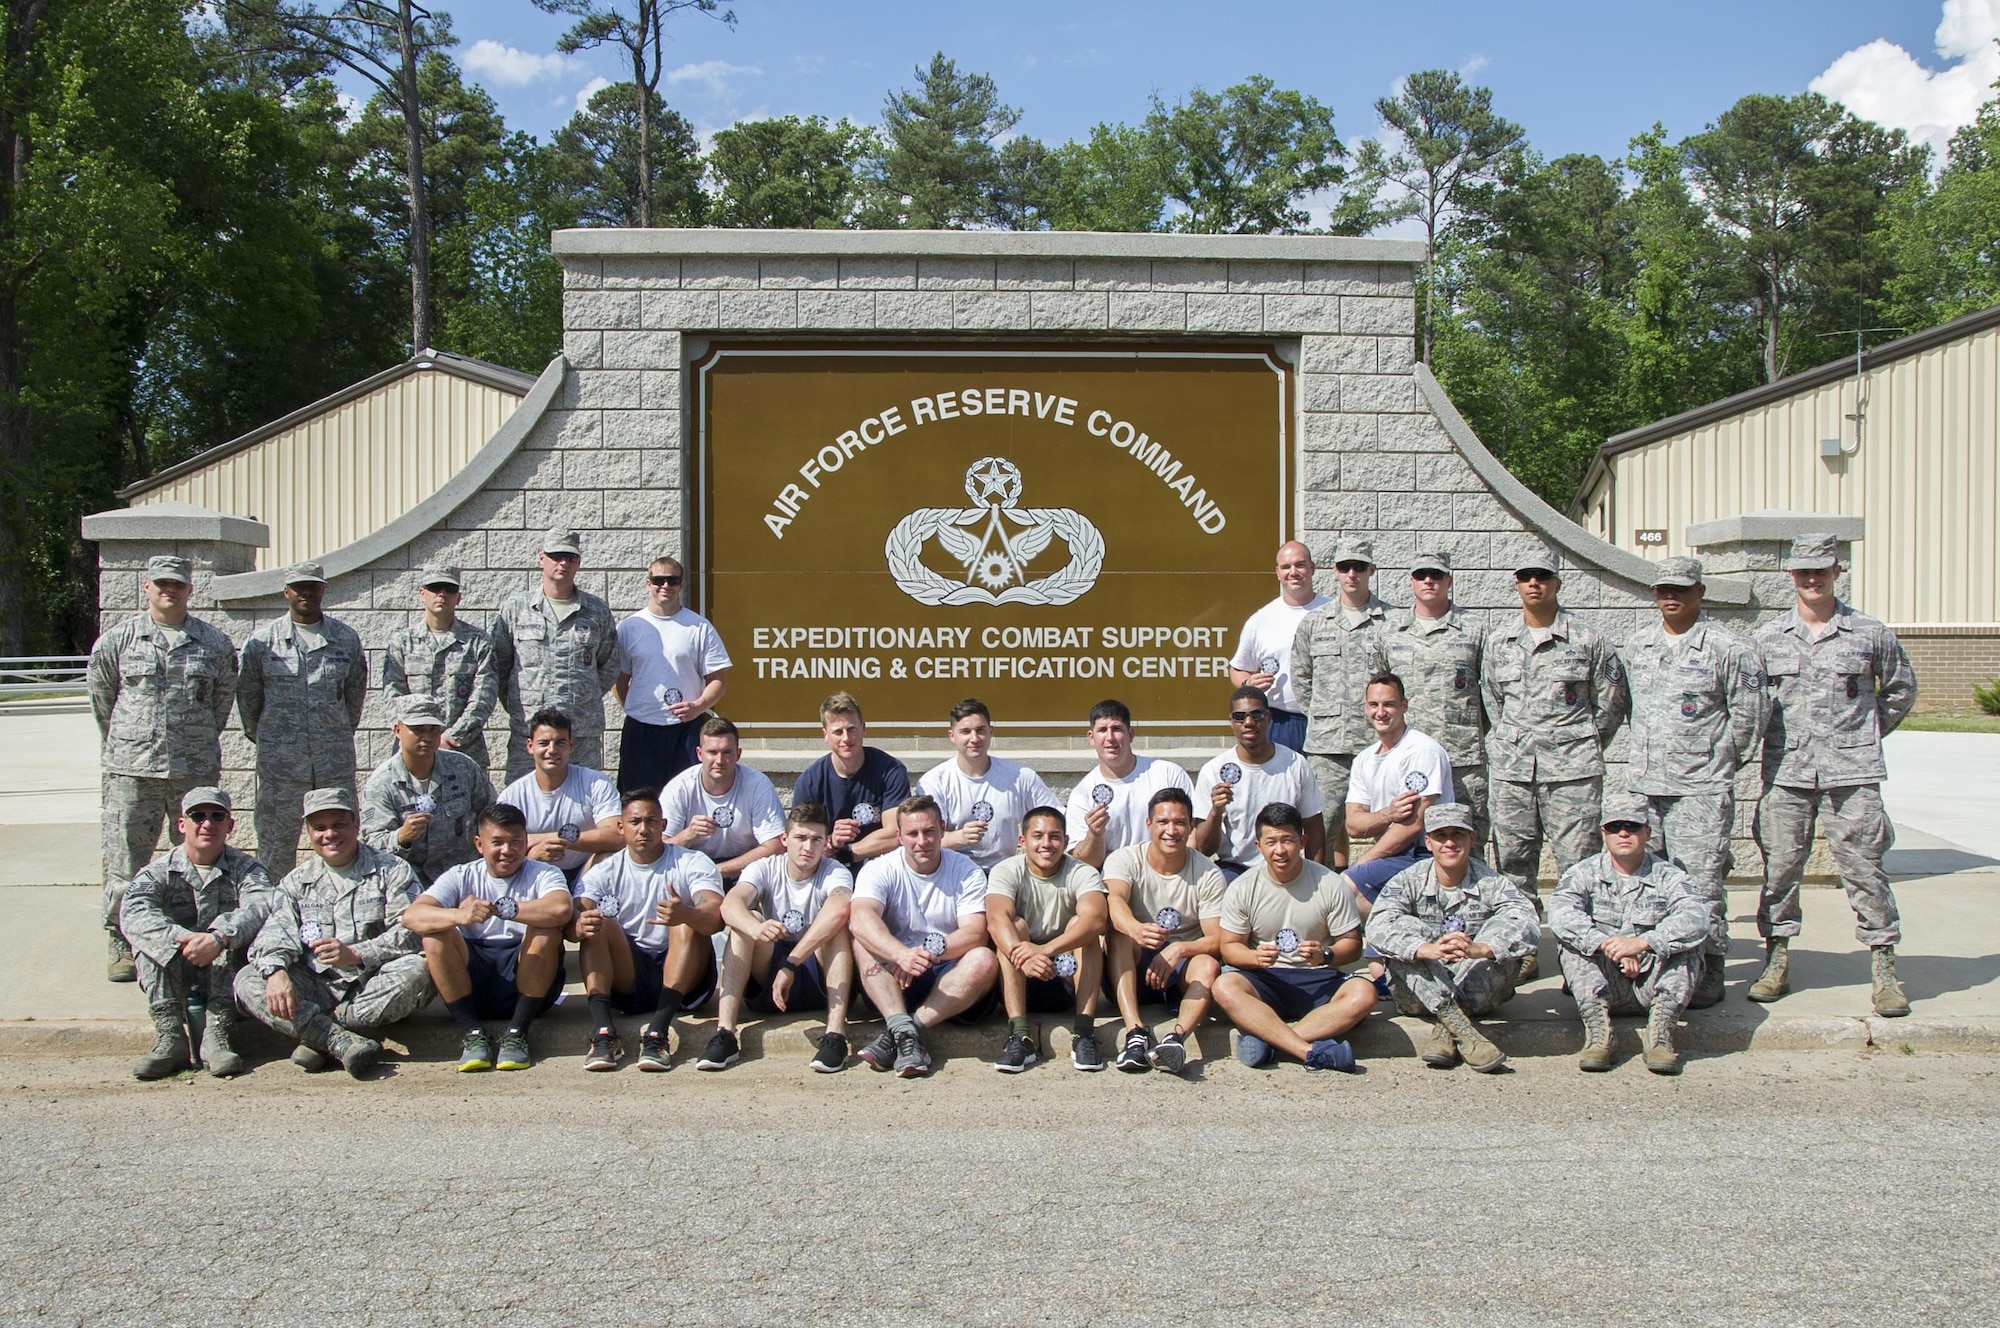 Air Force Reserve firefighters graduate from the first-ever Air Force Reserve Command Firefighter Rescue and Survival Course at Dobbins Air Reserve Base, Ga., April 18, 2017. Twenty Citizen Airmen participated in the intense 50-hour course held at the 622nd Civil Engineer Group expeditionary combat support-training certification center, which focused on a Rapid Intervention Crew, or RIC. The RIC is a dedicated and specially trained group of firefighters whose responsibilities include safely evacuating a distressed firefighter from a structure. (U.S. Air Force photo by Master Sgt. Theanne K. Herrmann)